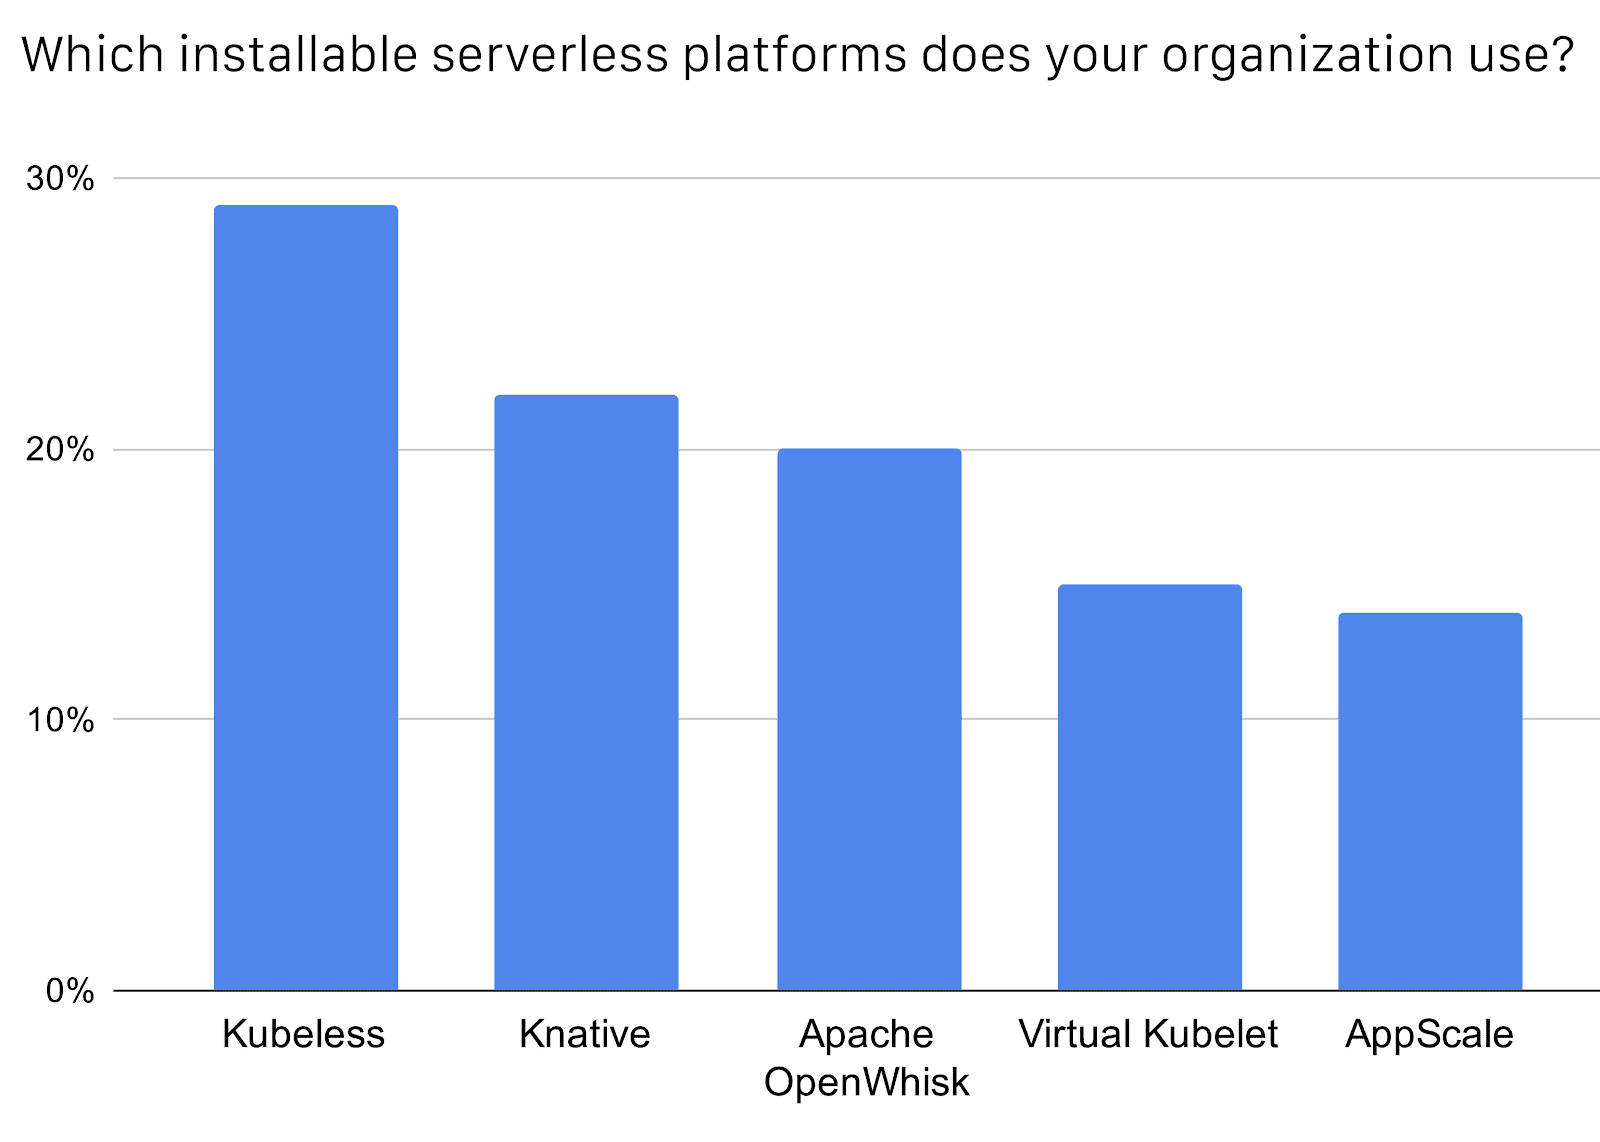 Bar chart shows installable serverless platforms used by organizations.